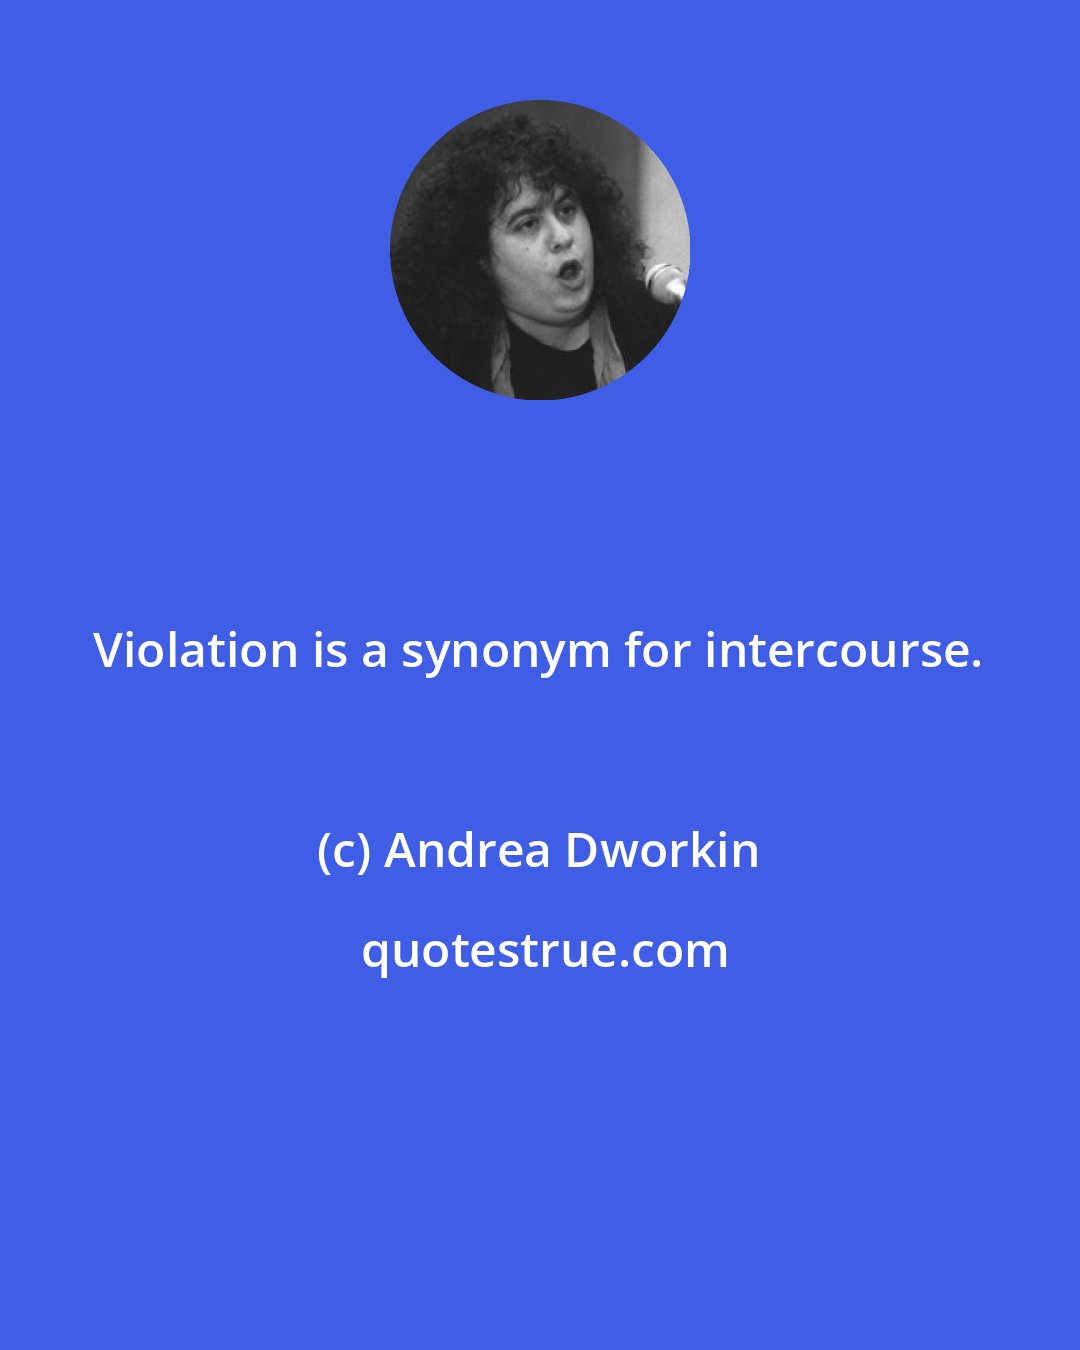 Andrea Dworkin: Violation is a synonym for intercourse.